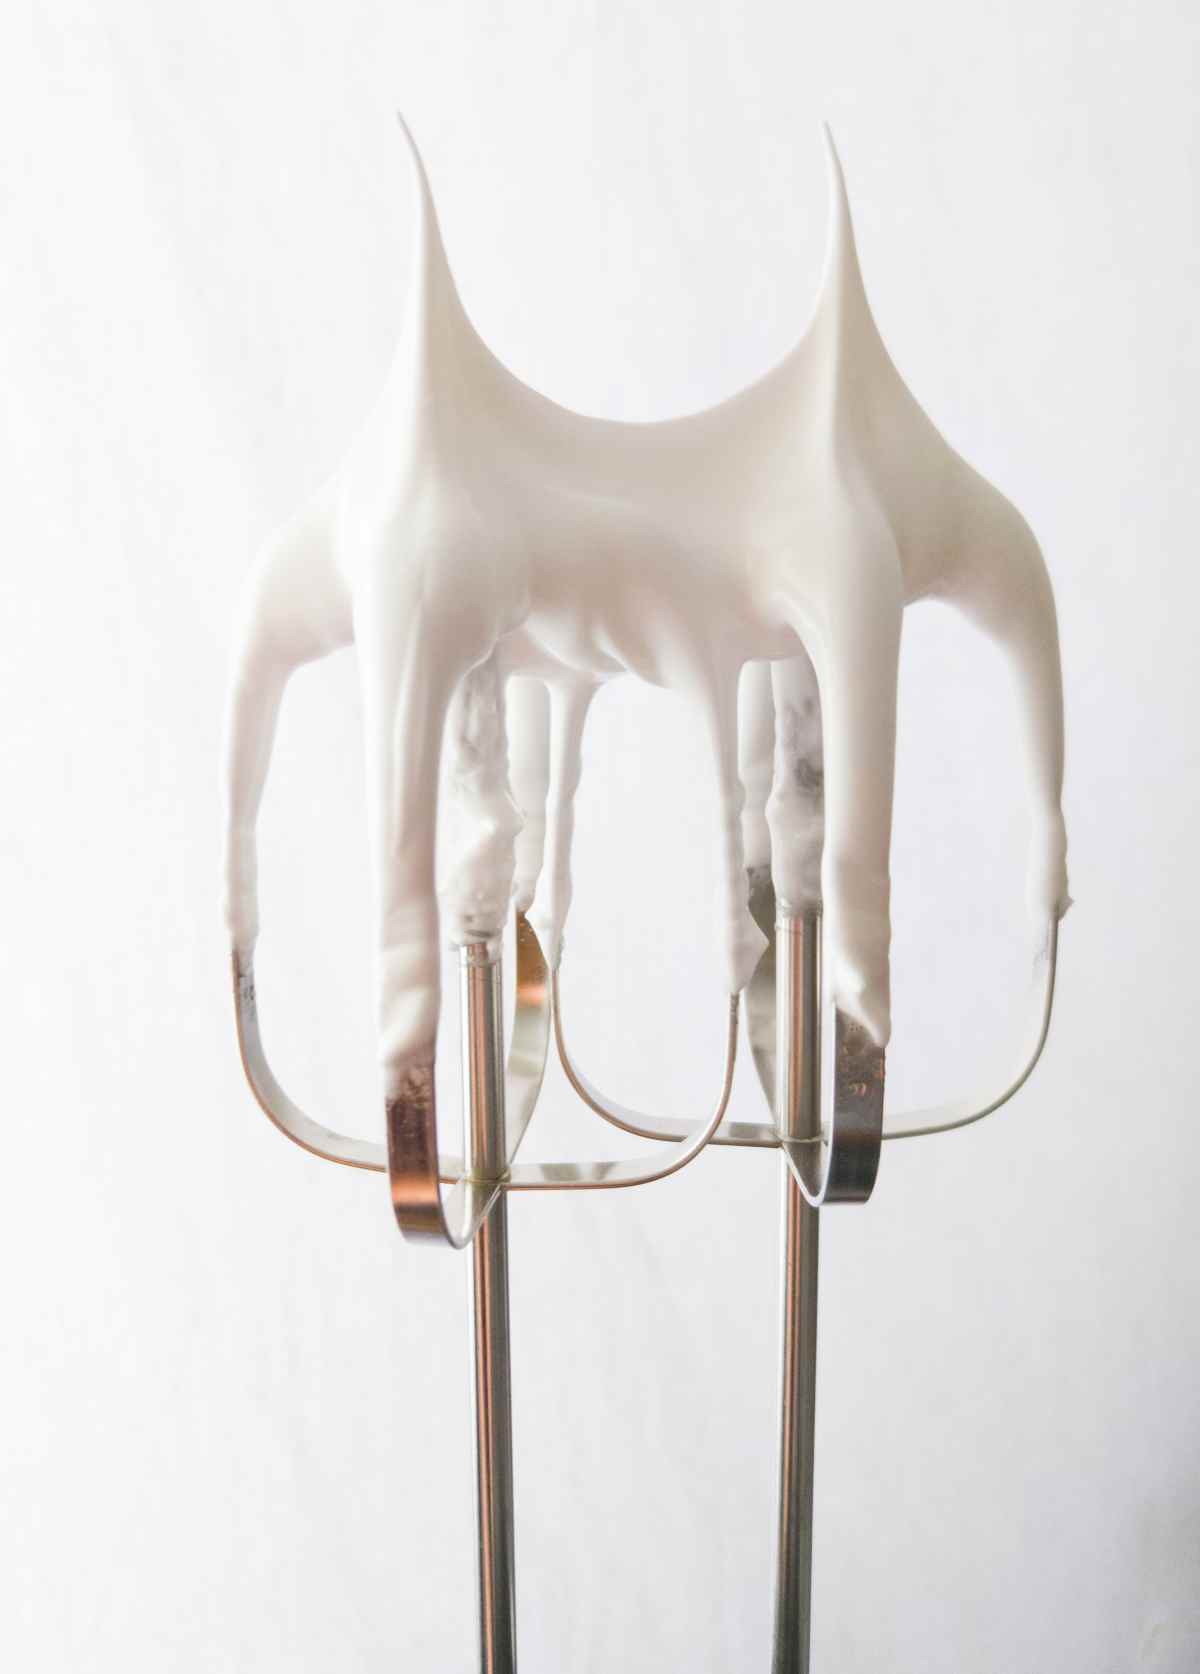 Two whisks with upward looking tips on a white background.